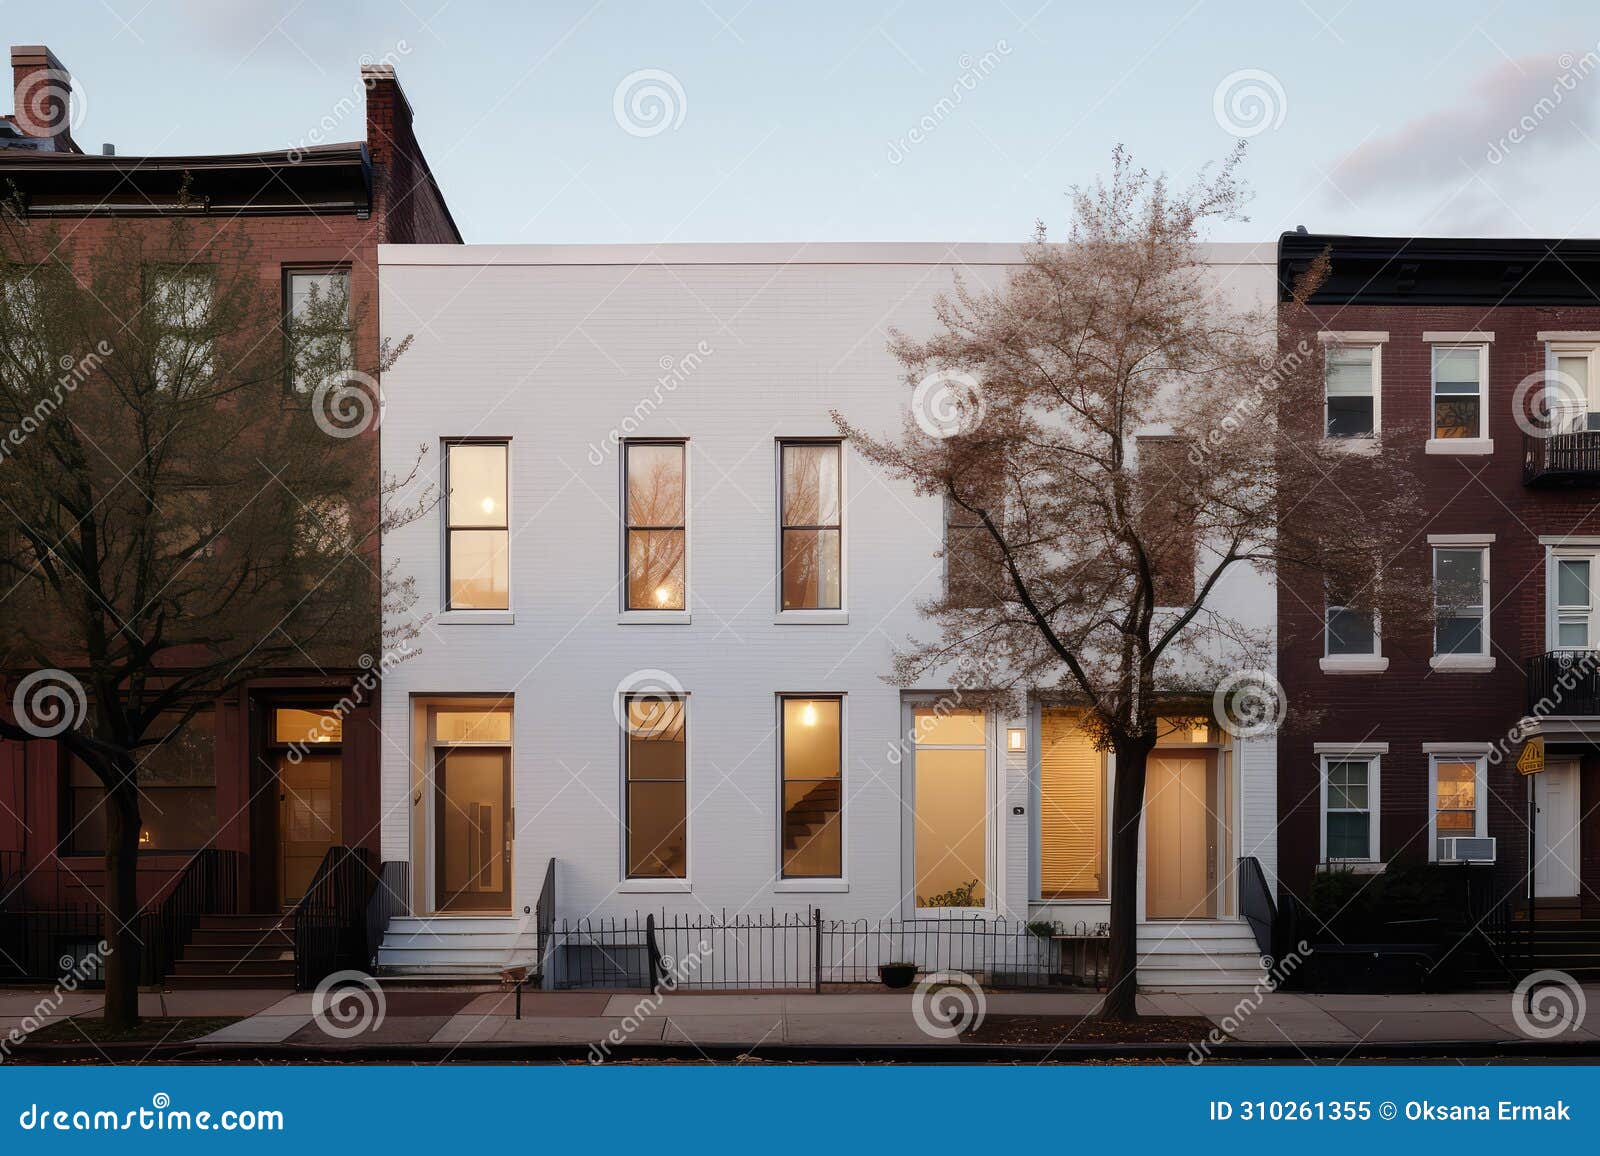 white row houses, street landscape, brooklyn architeture, facades of american houses